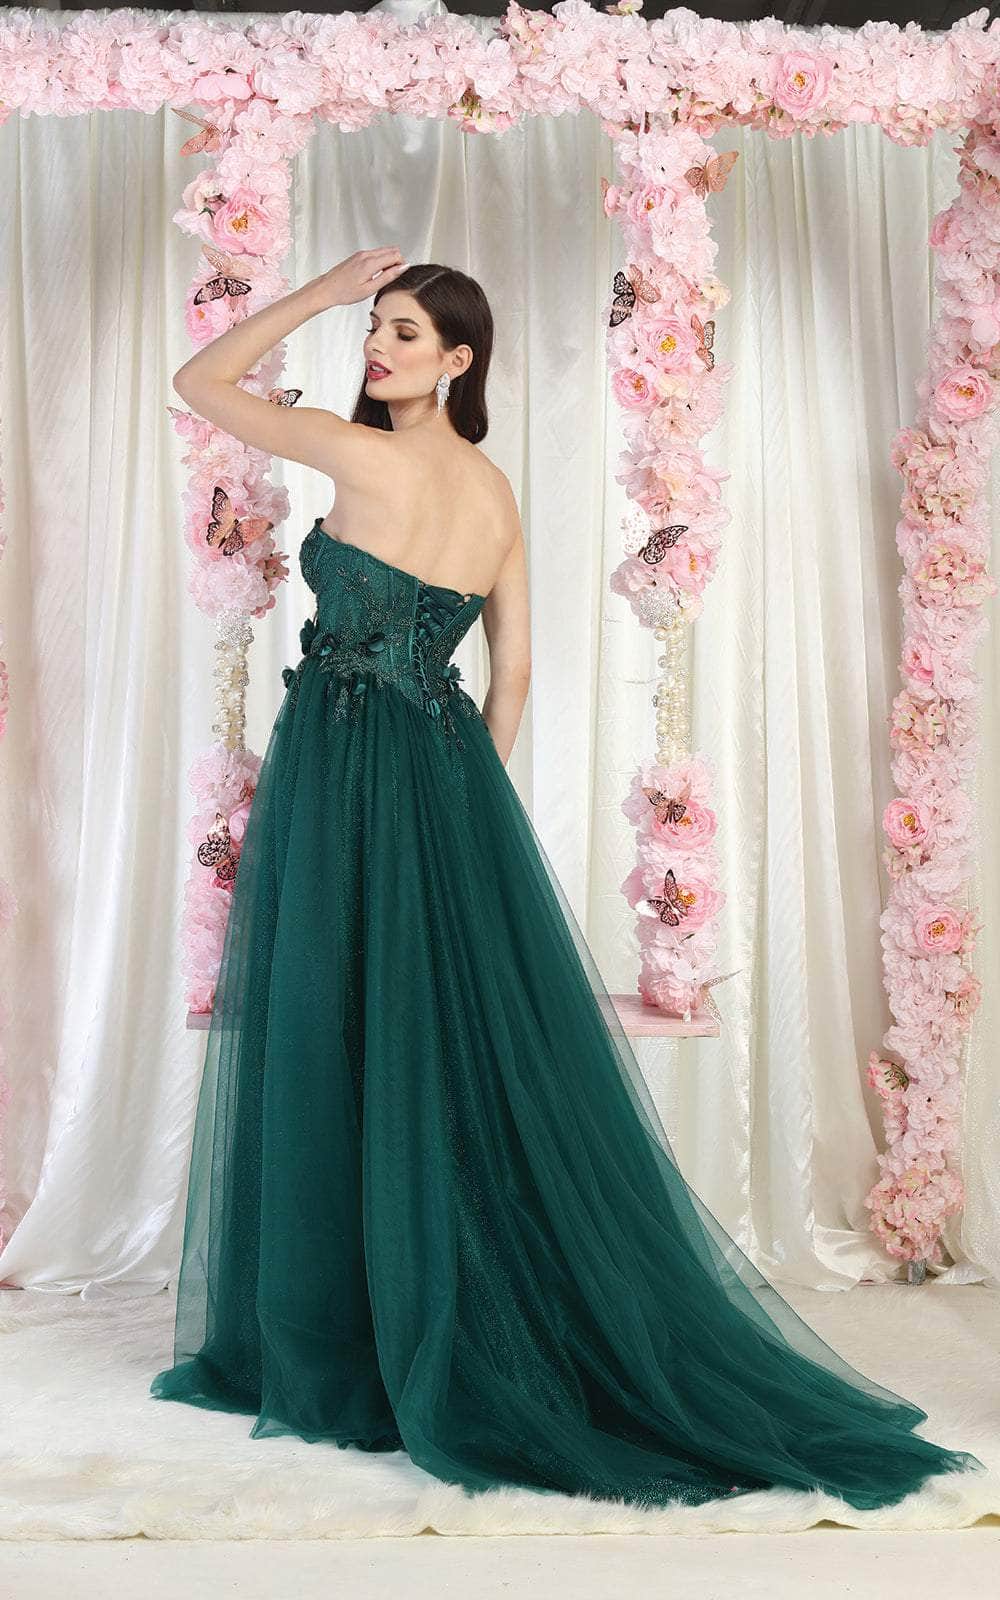 May Queen MQ1961 - Embellished Strapless Ballgown Special Occasion Dress